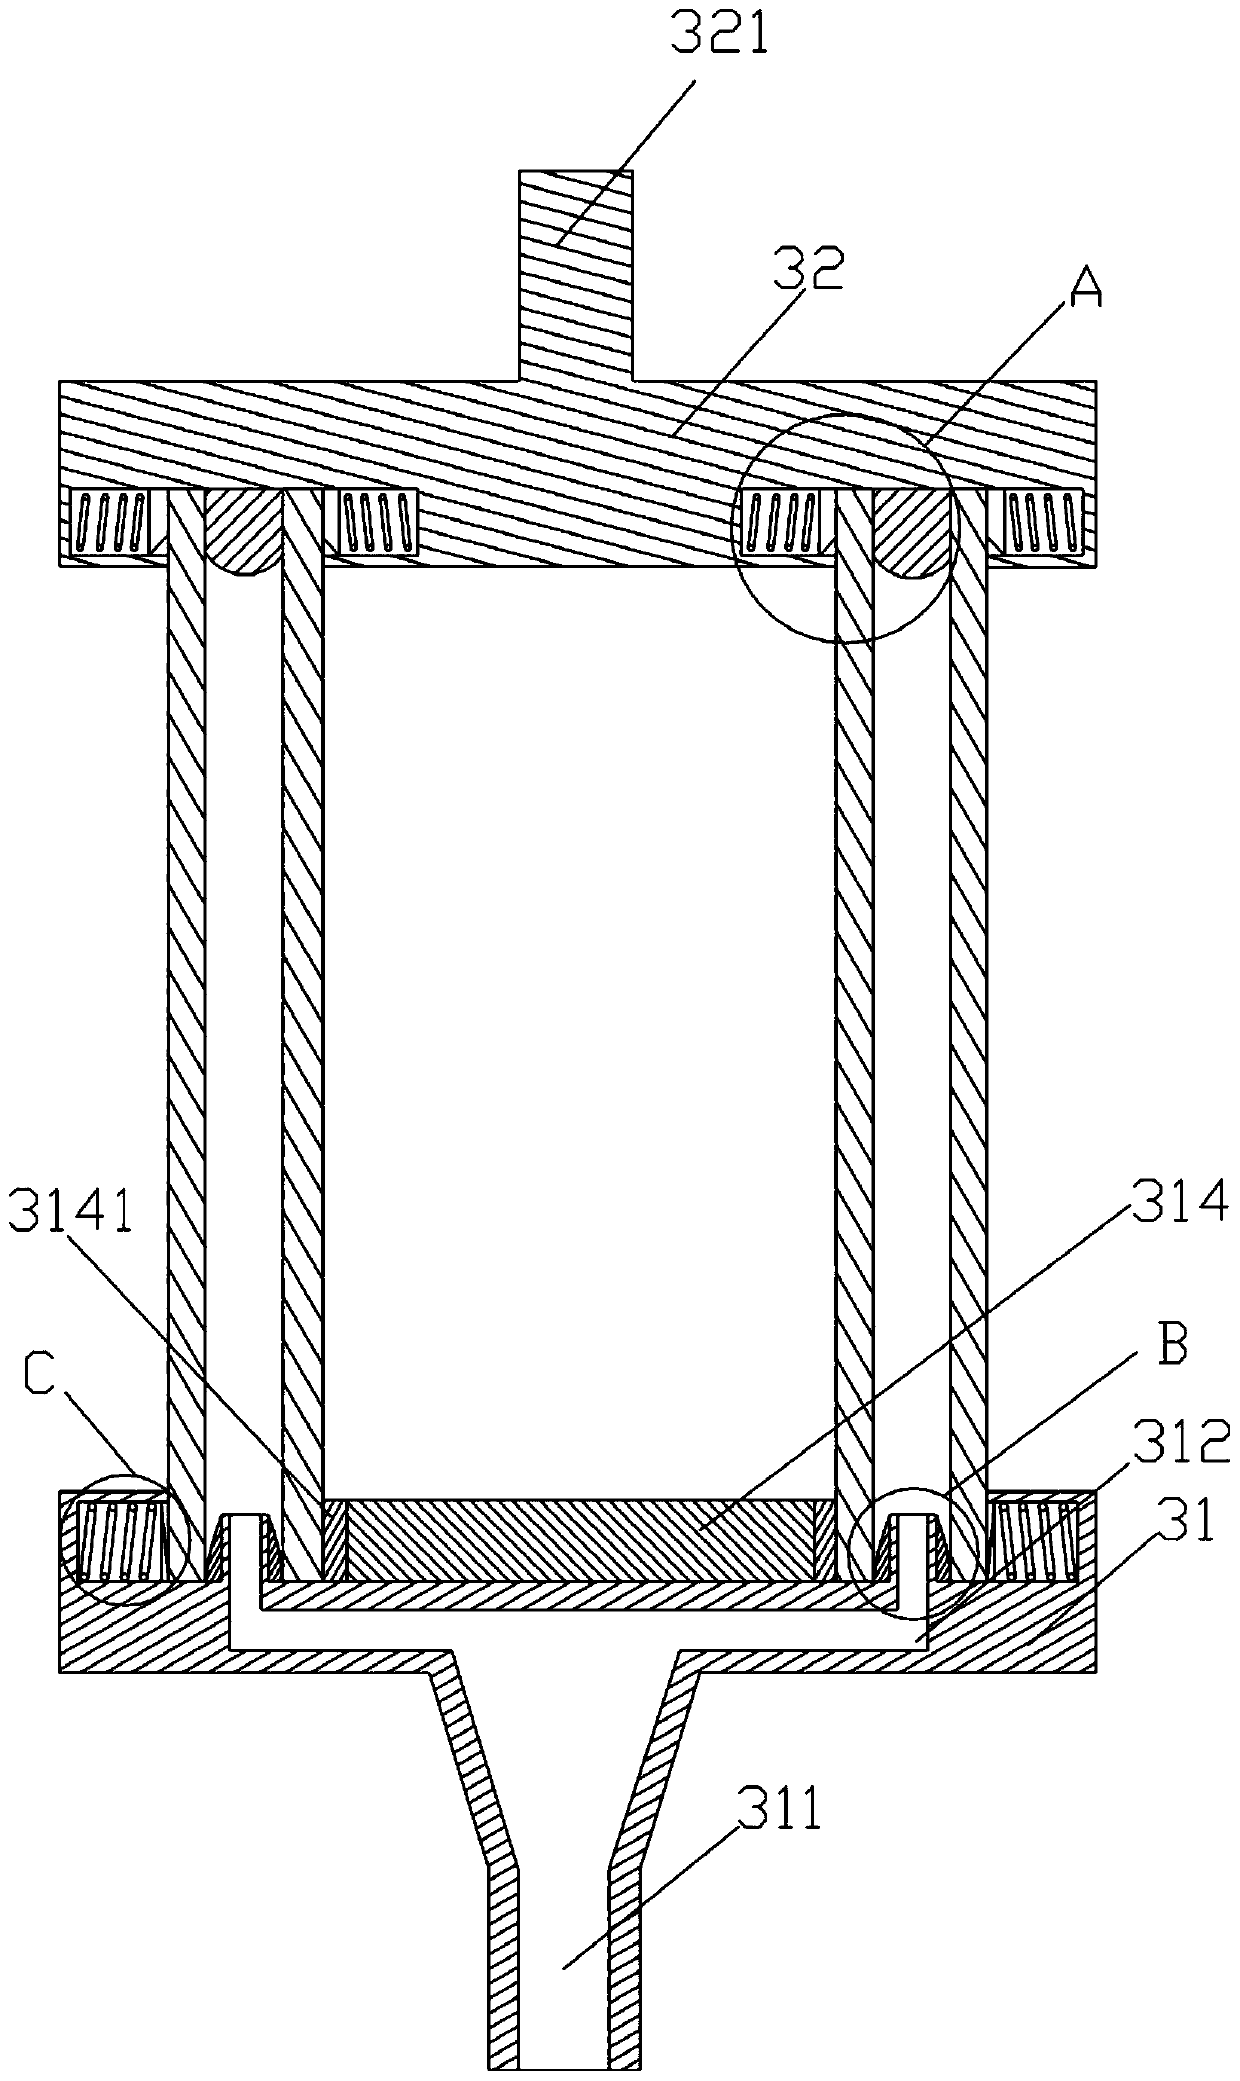 Casing detecting device for detecting water-cooled motor